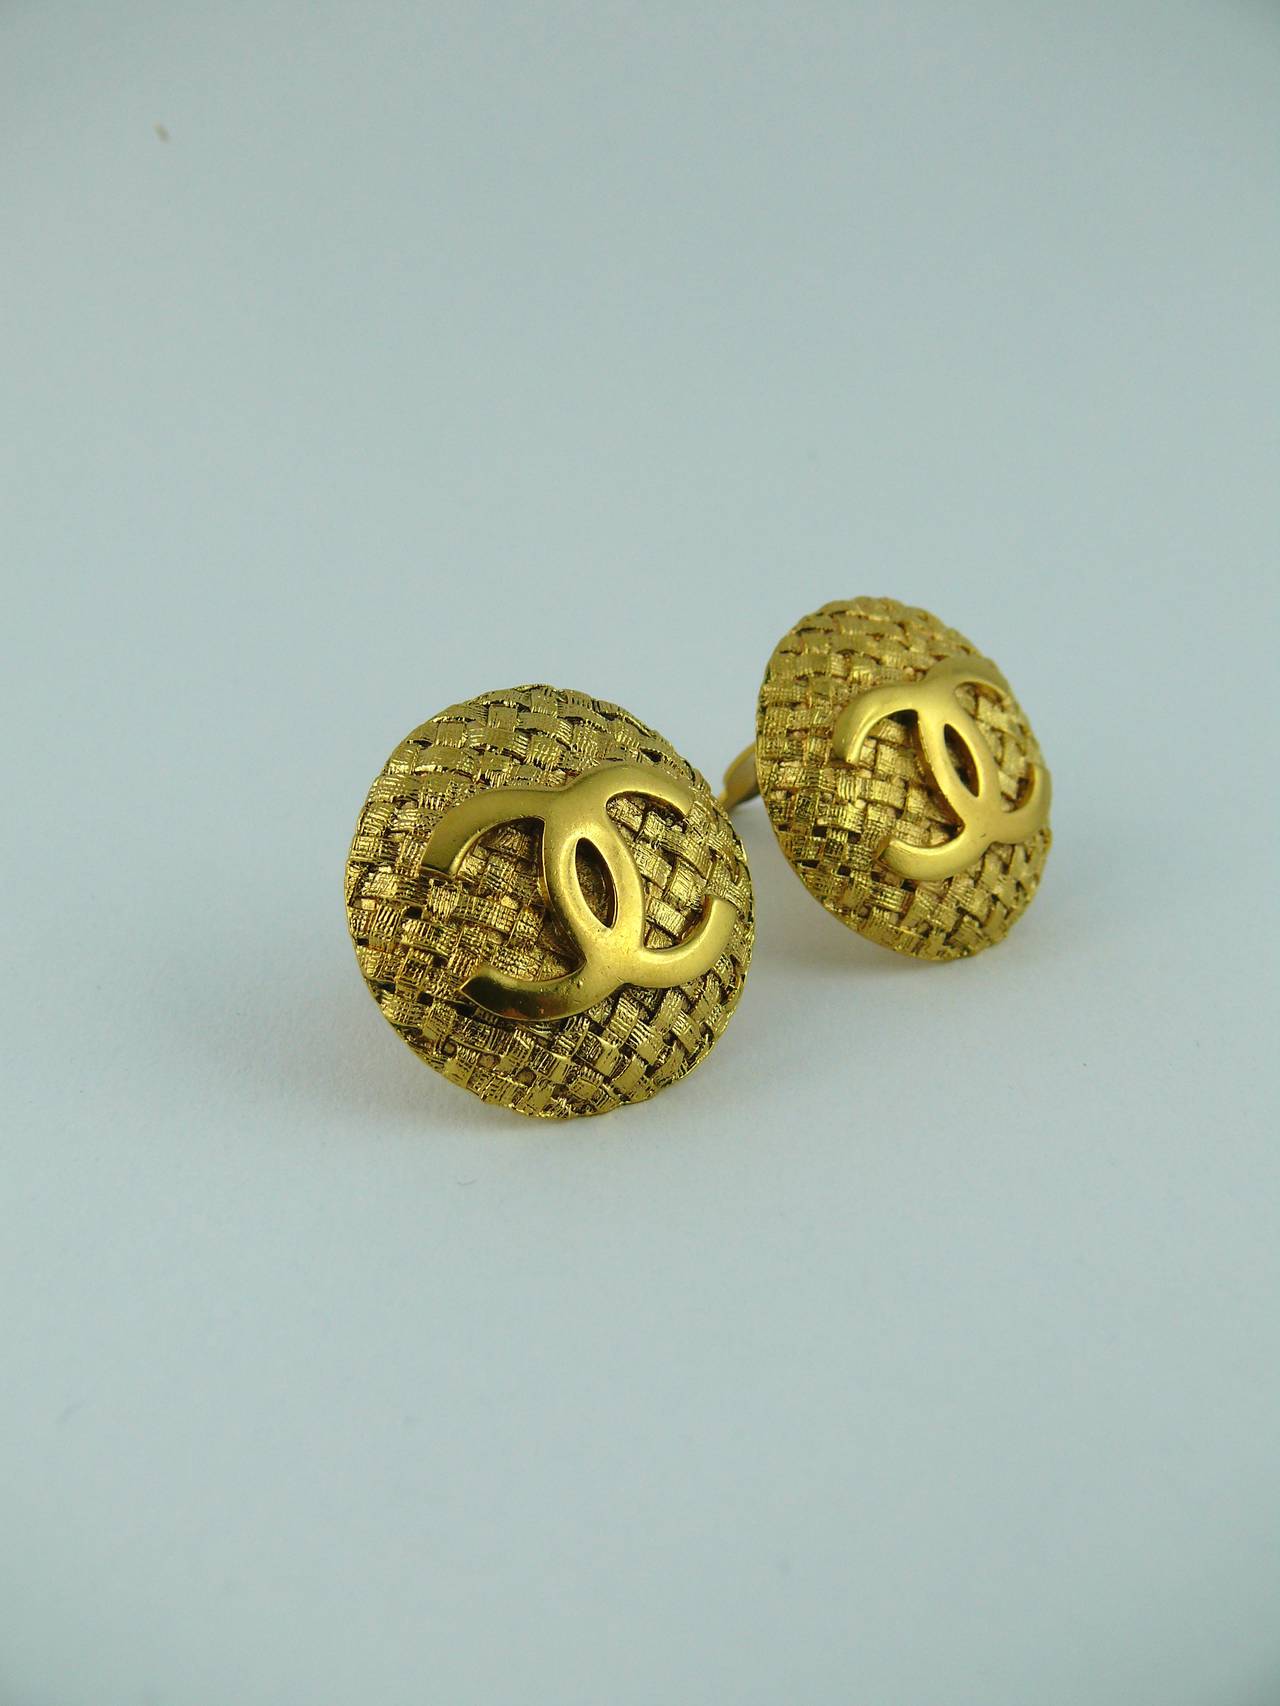 CHANEL vintage gold toned CC monogram clip-on earrings on a woven textured background.

Marked CHANEL 2 9 Made in France.
Numbered 2862.

JEWELRY CONDITION CHART
- New or never worn : item is in pristine condition with no noticeable imperfections
-